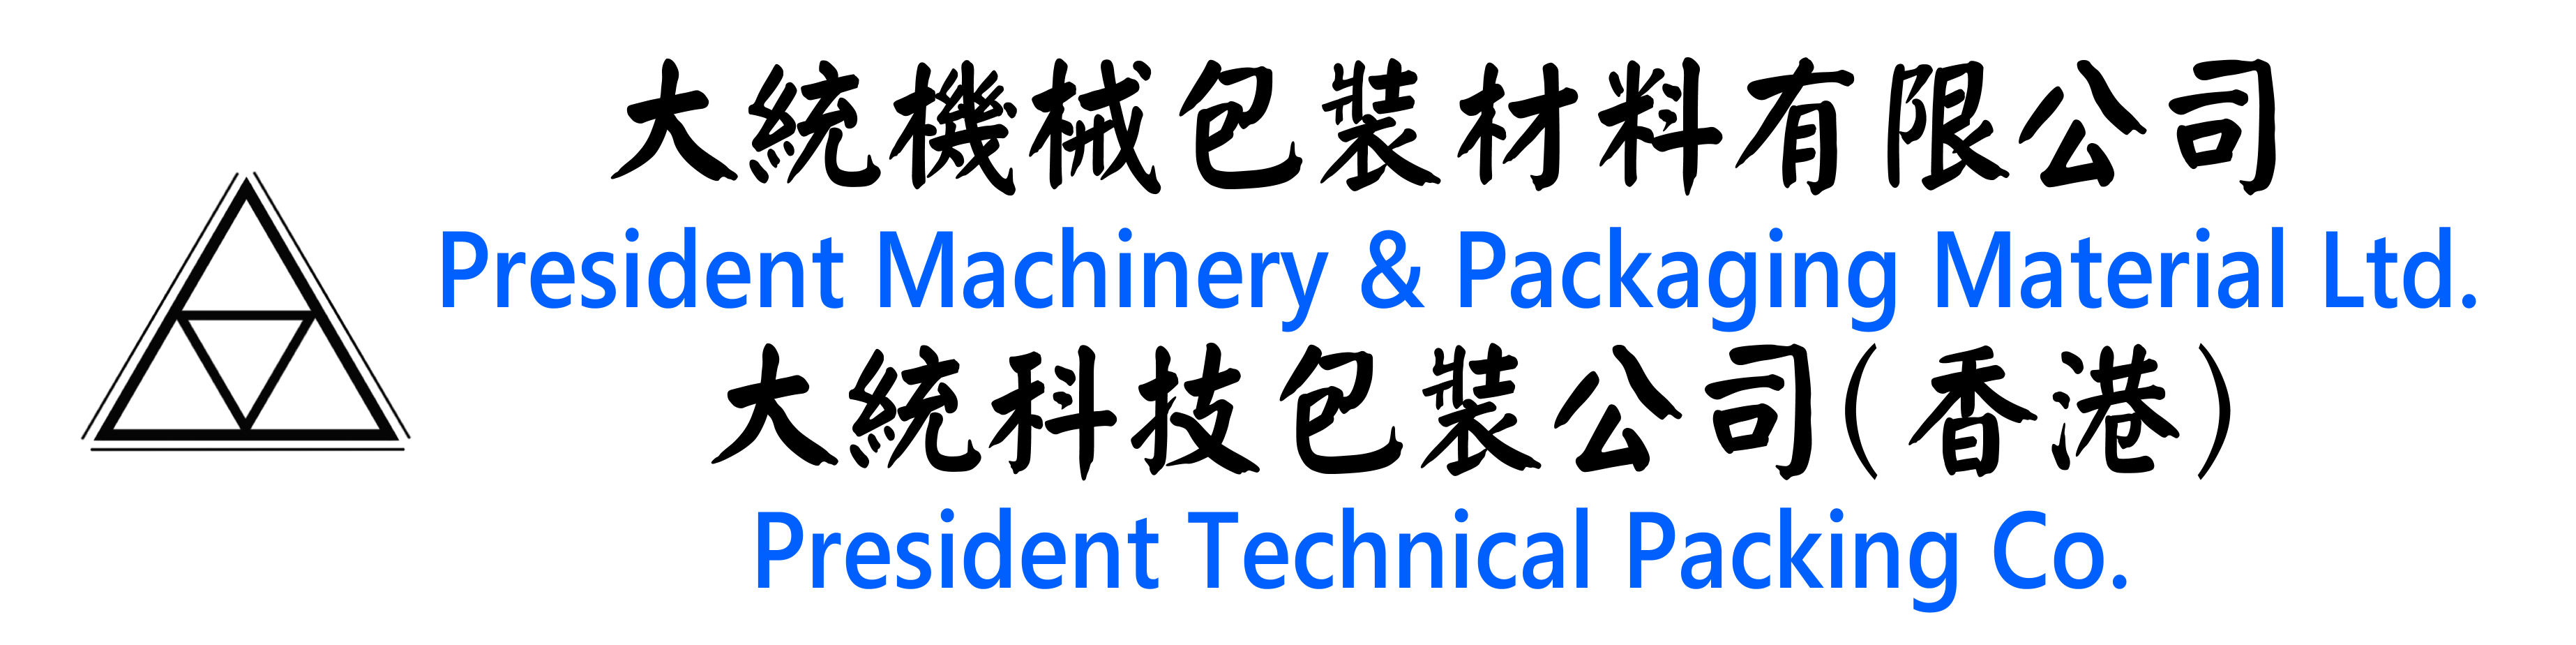 President Machinery & Packing Material Ltd.